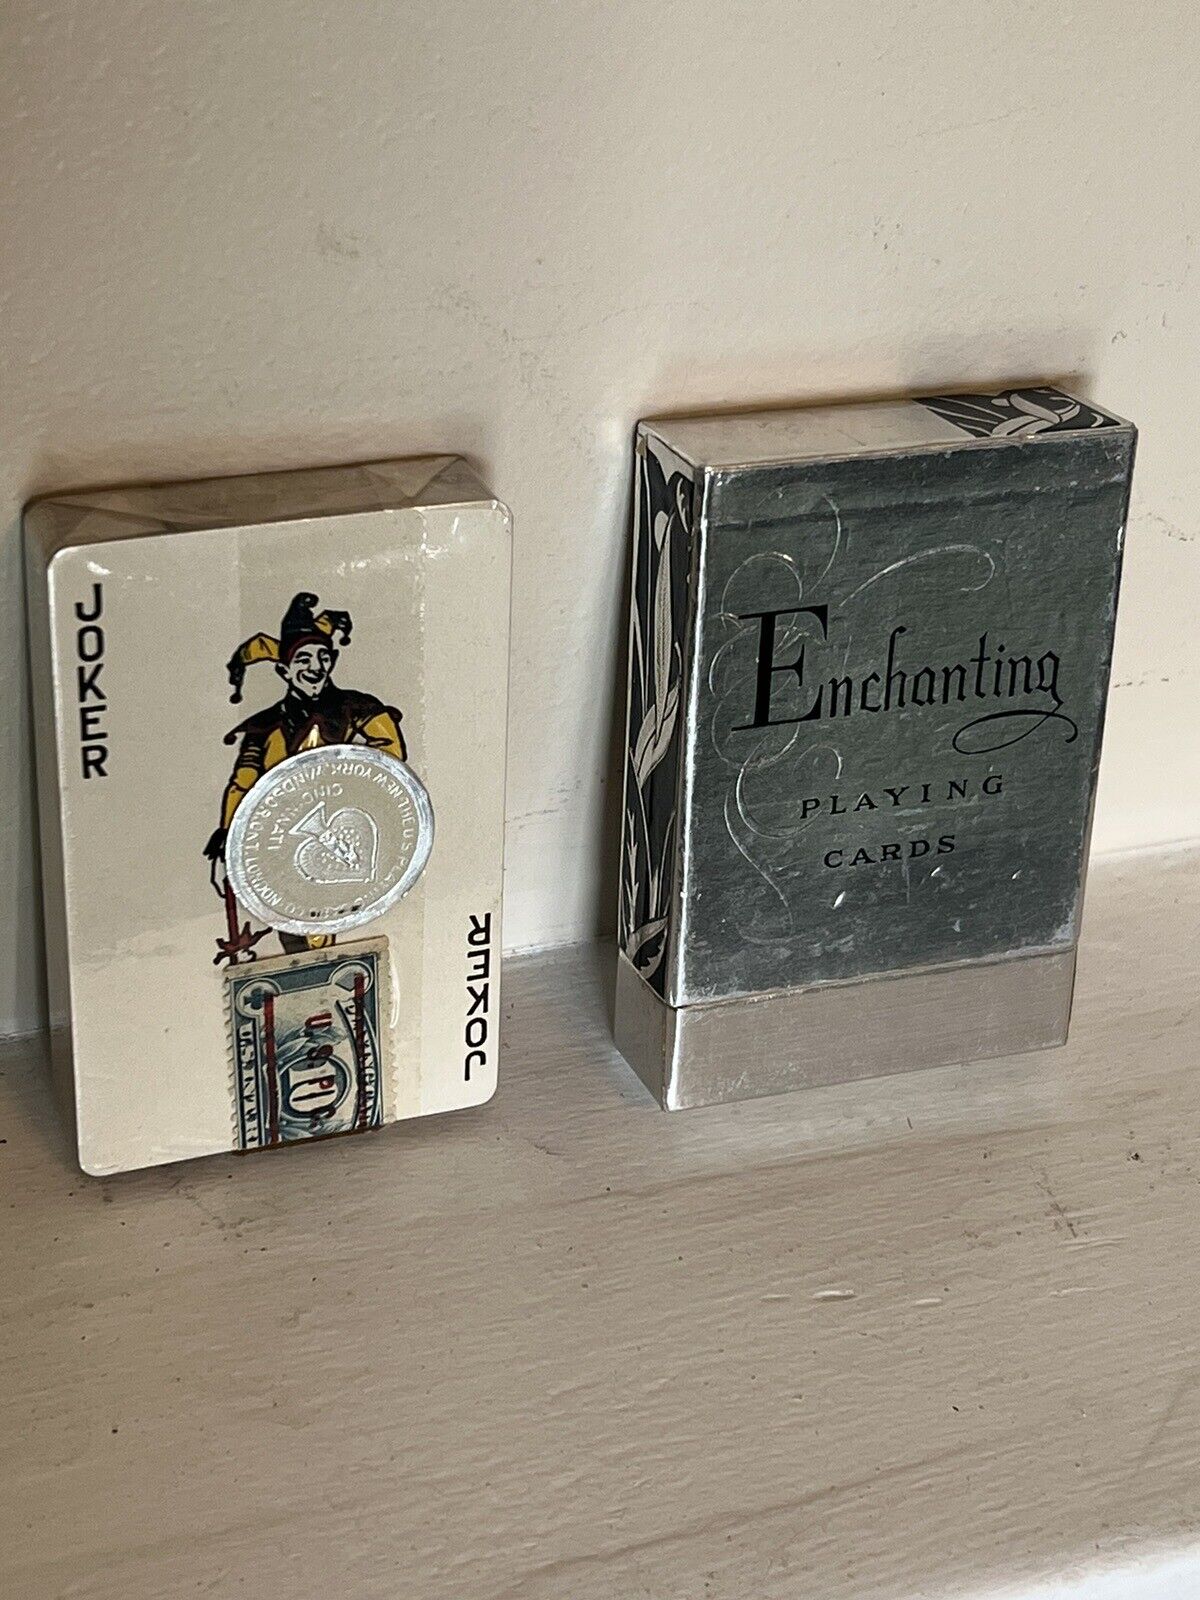 Enchanting Playing Cards Sealed Deck With Stamp And Seal Cincinnati Ohio